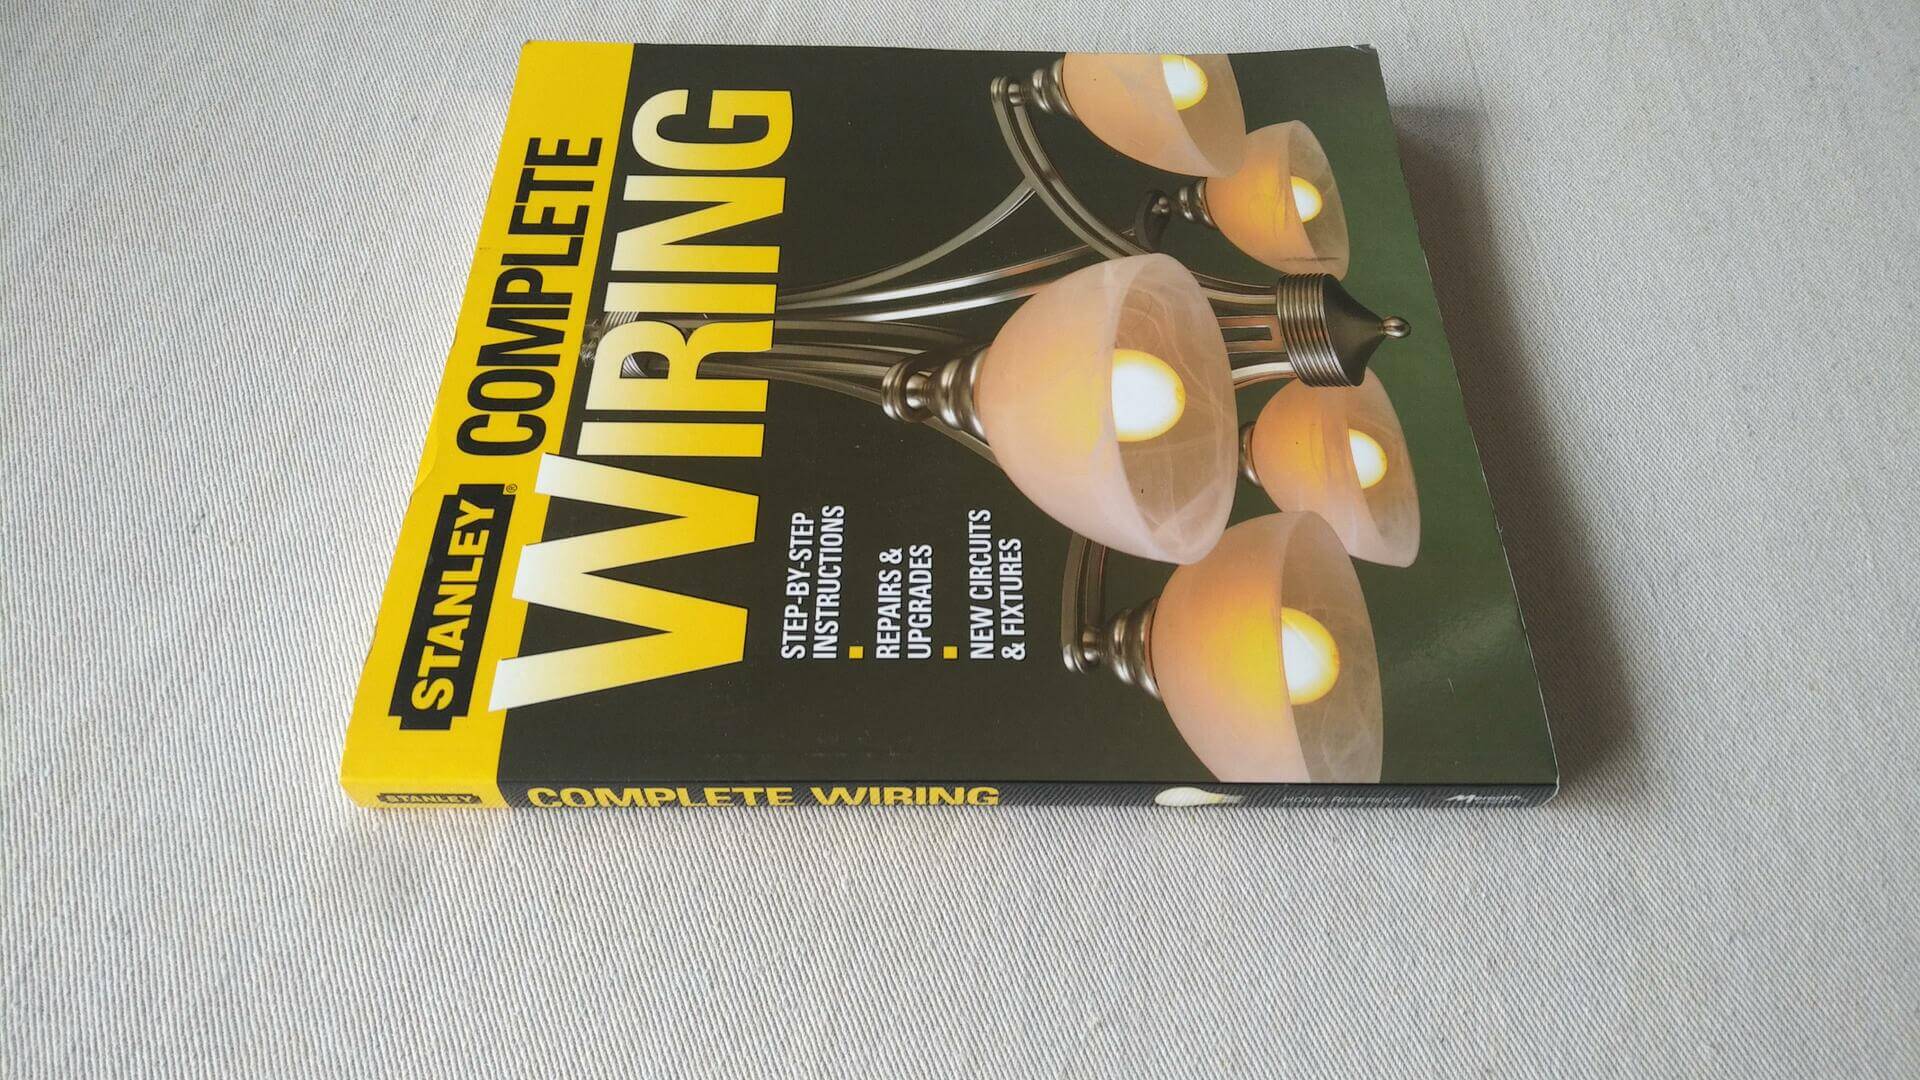 stanley-complete-wiring-book-ken-sidey-stnley-works-inc-2003-isnb-0696217309-electrician-diy-wiring-reference-electrical-code-guide